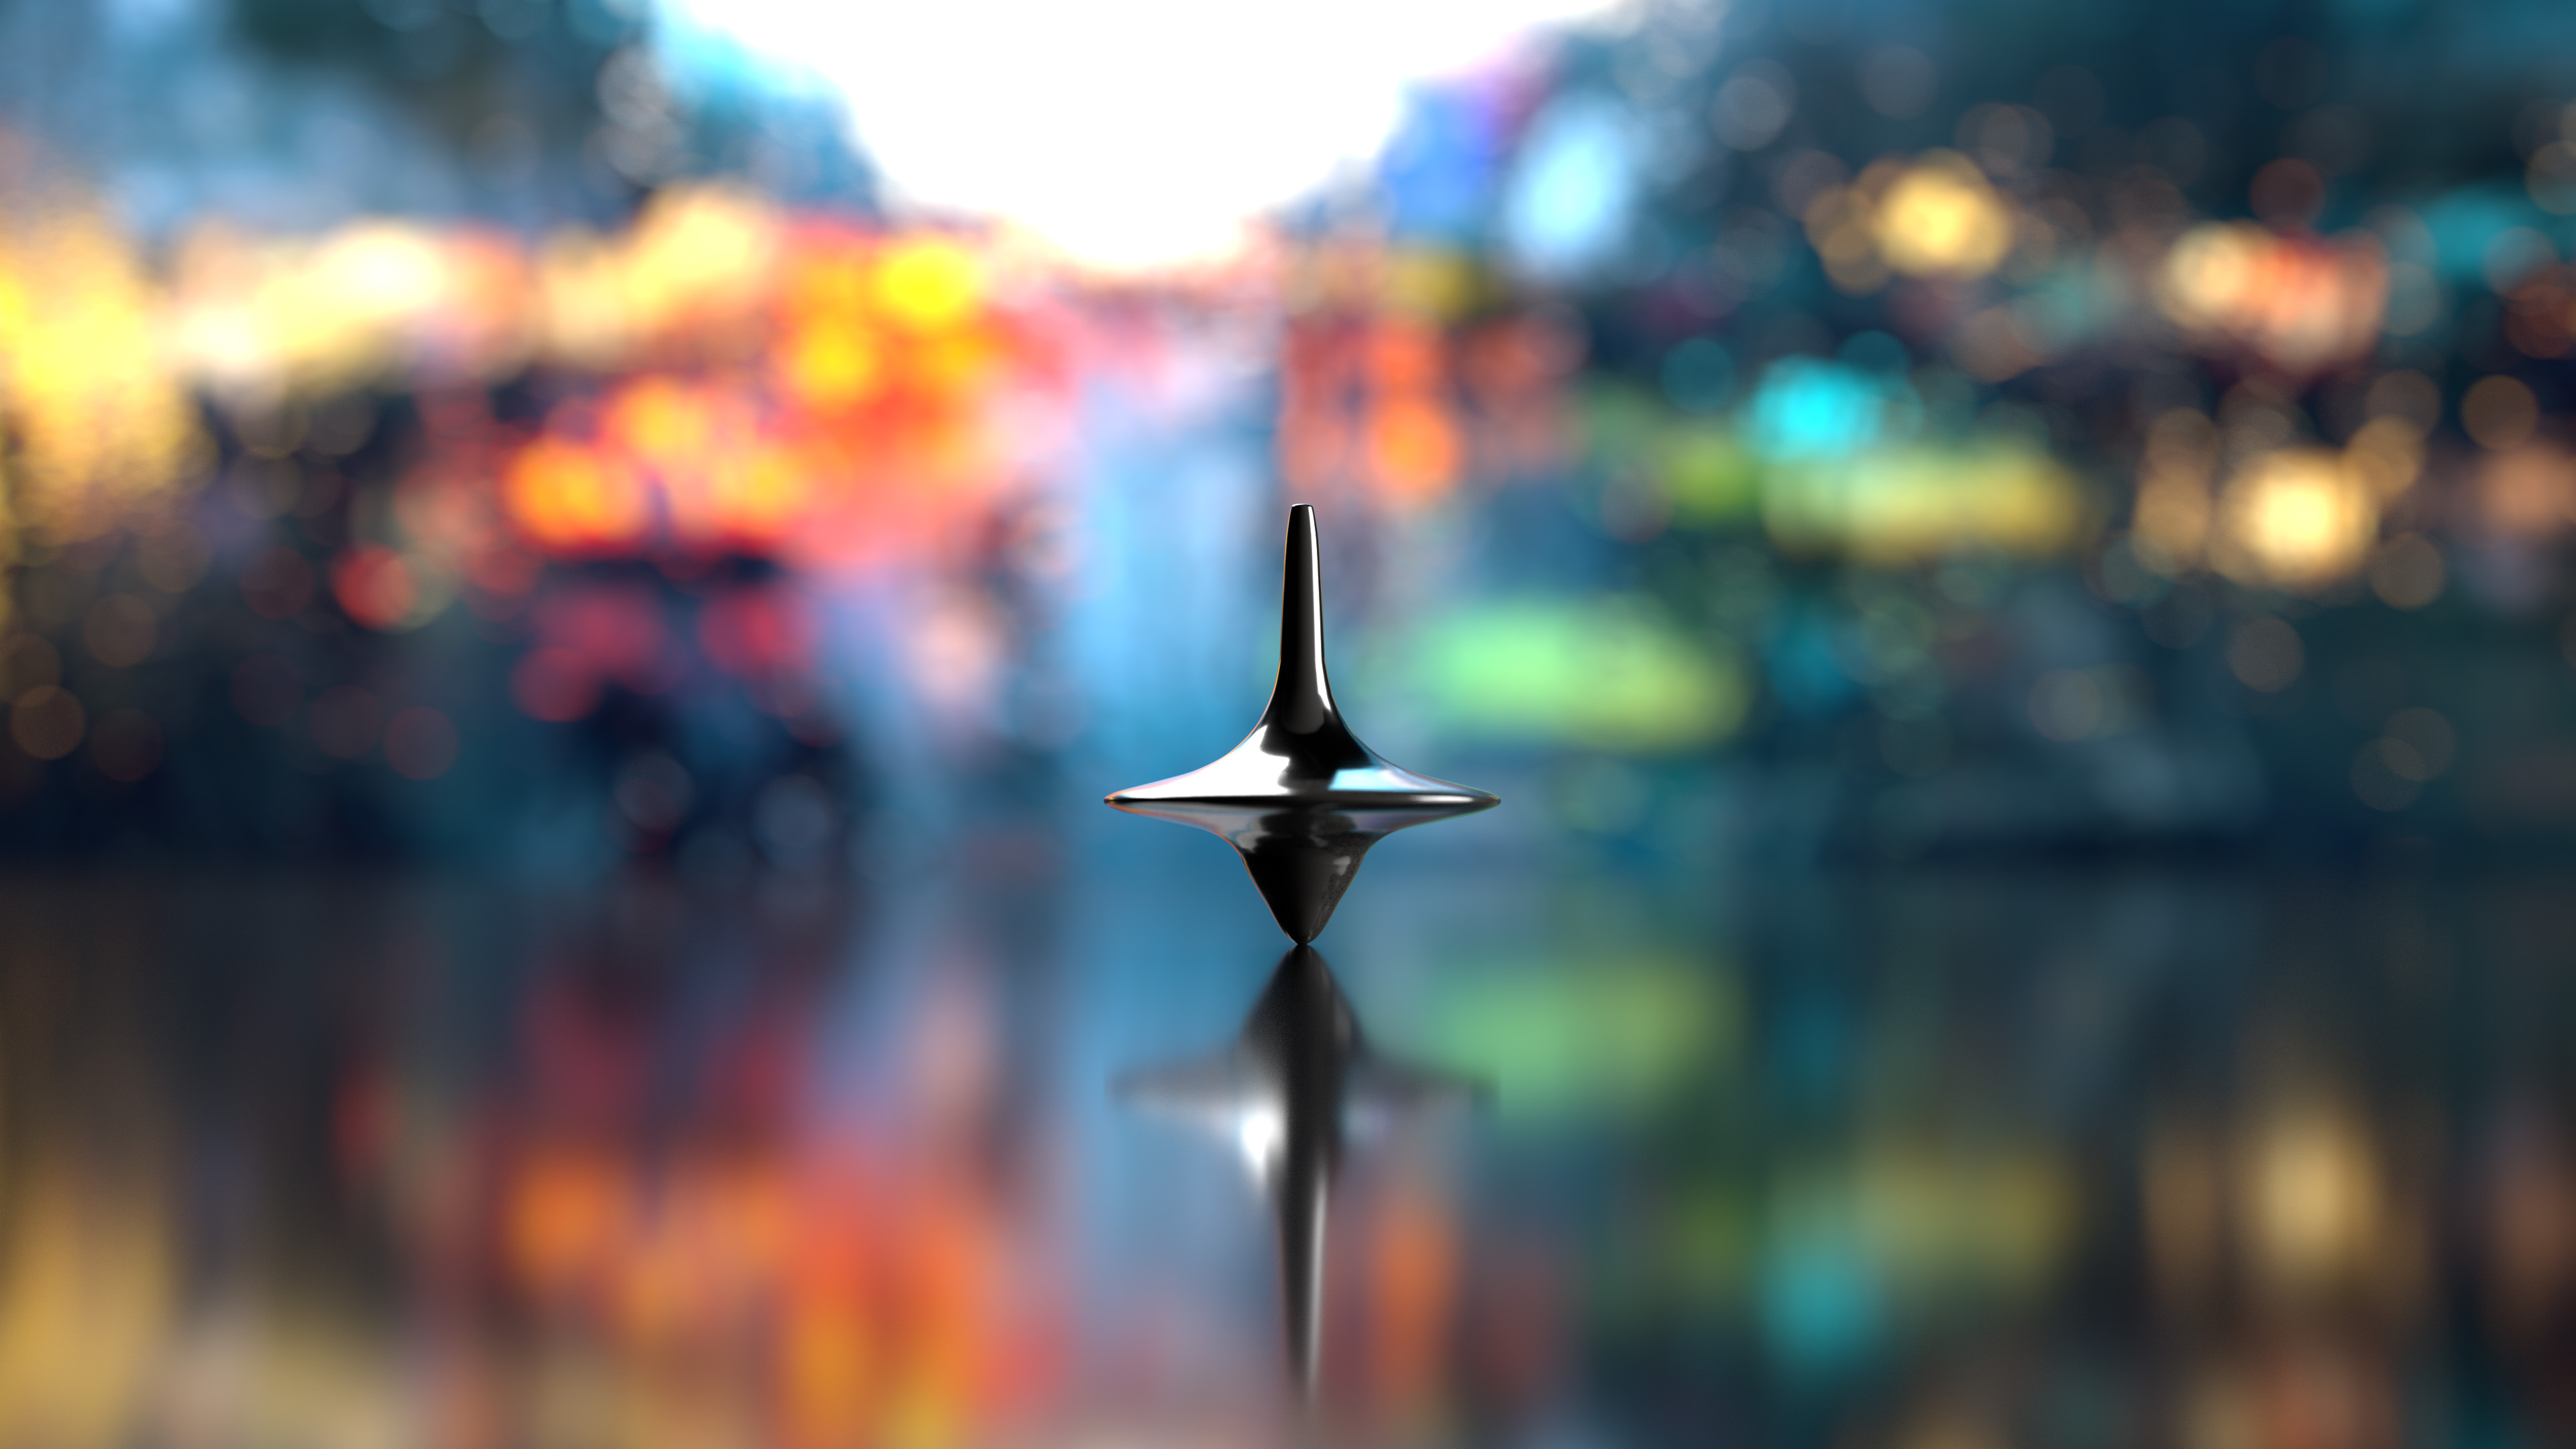 Inception HD Wallpapers and Backgrounds. 